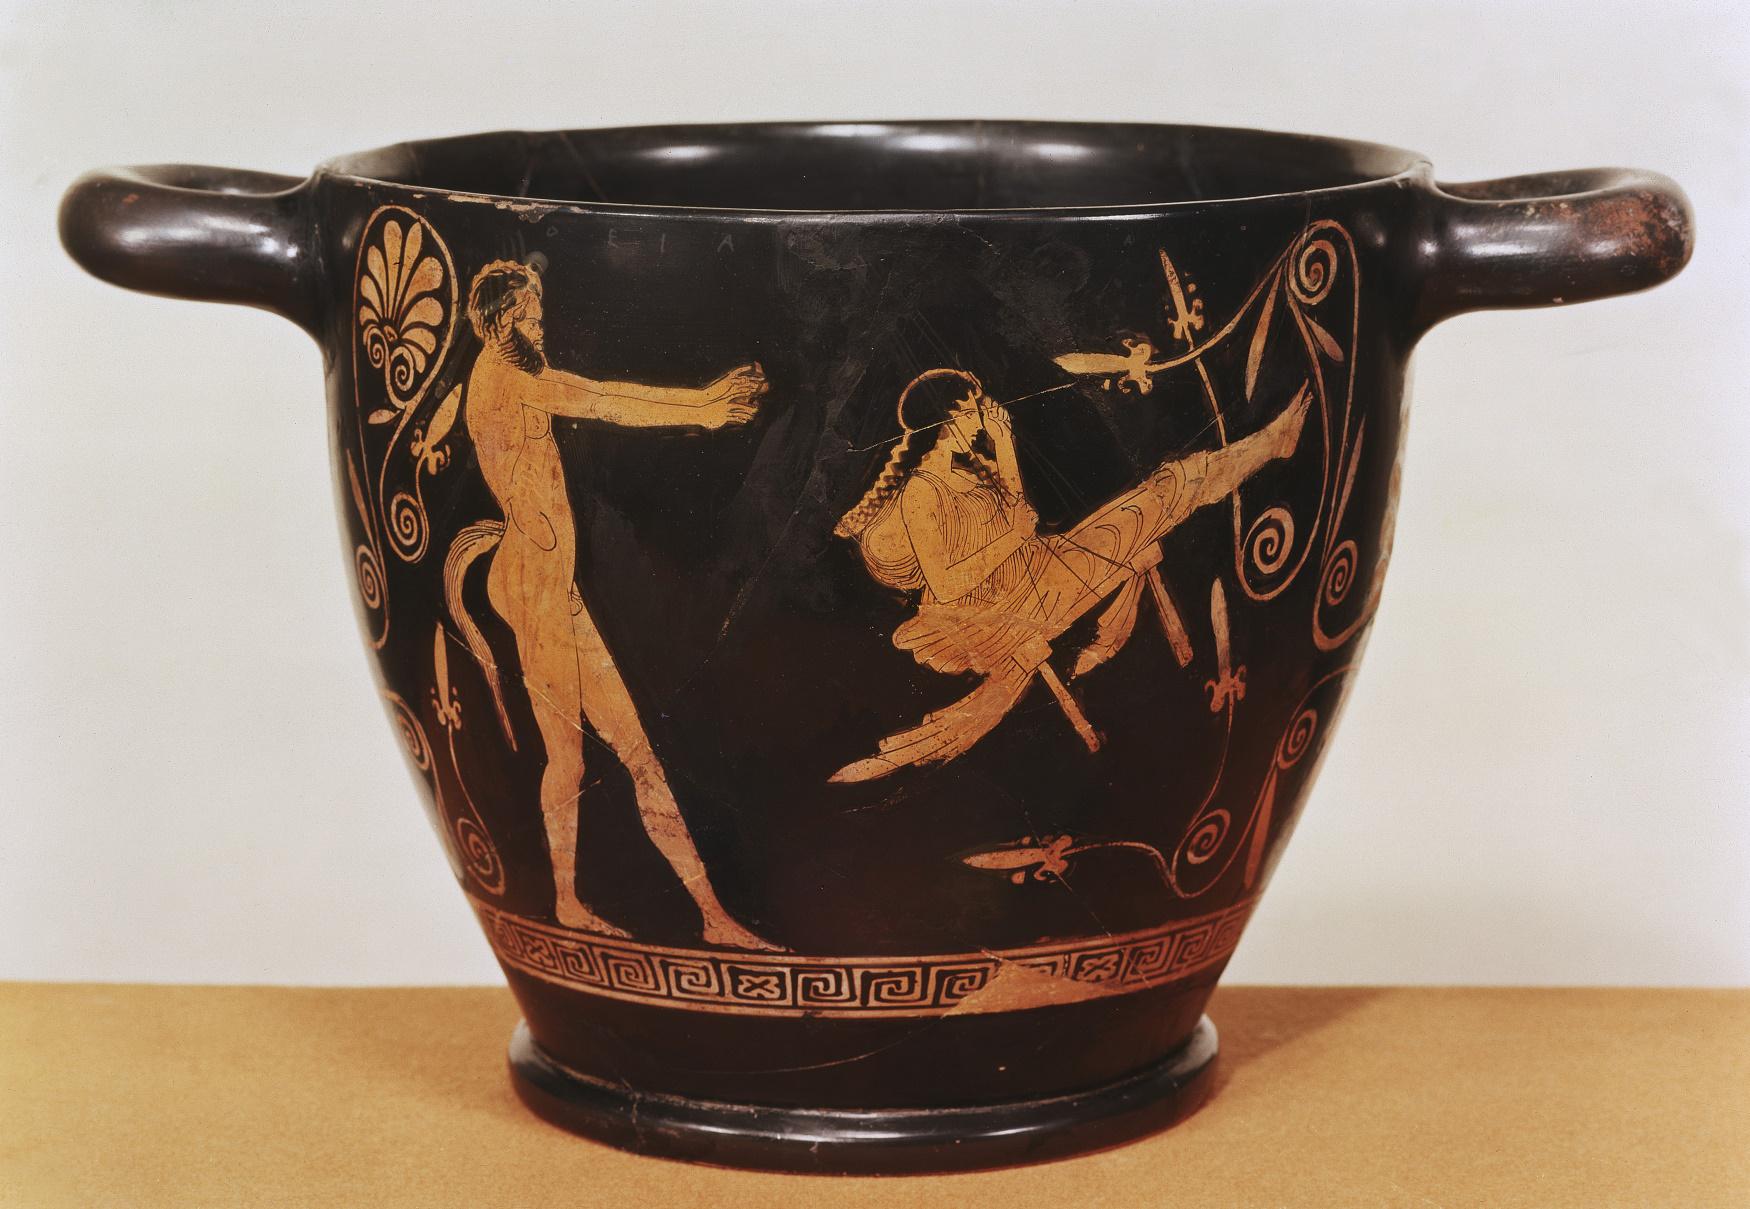 Attic skyphos [cup], with a scene of a satyr pushing a girl on a swing. Chiusi, mid 5th c. BCE. Berlin museums.jpg